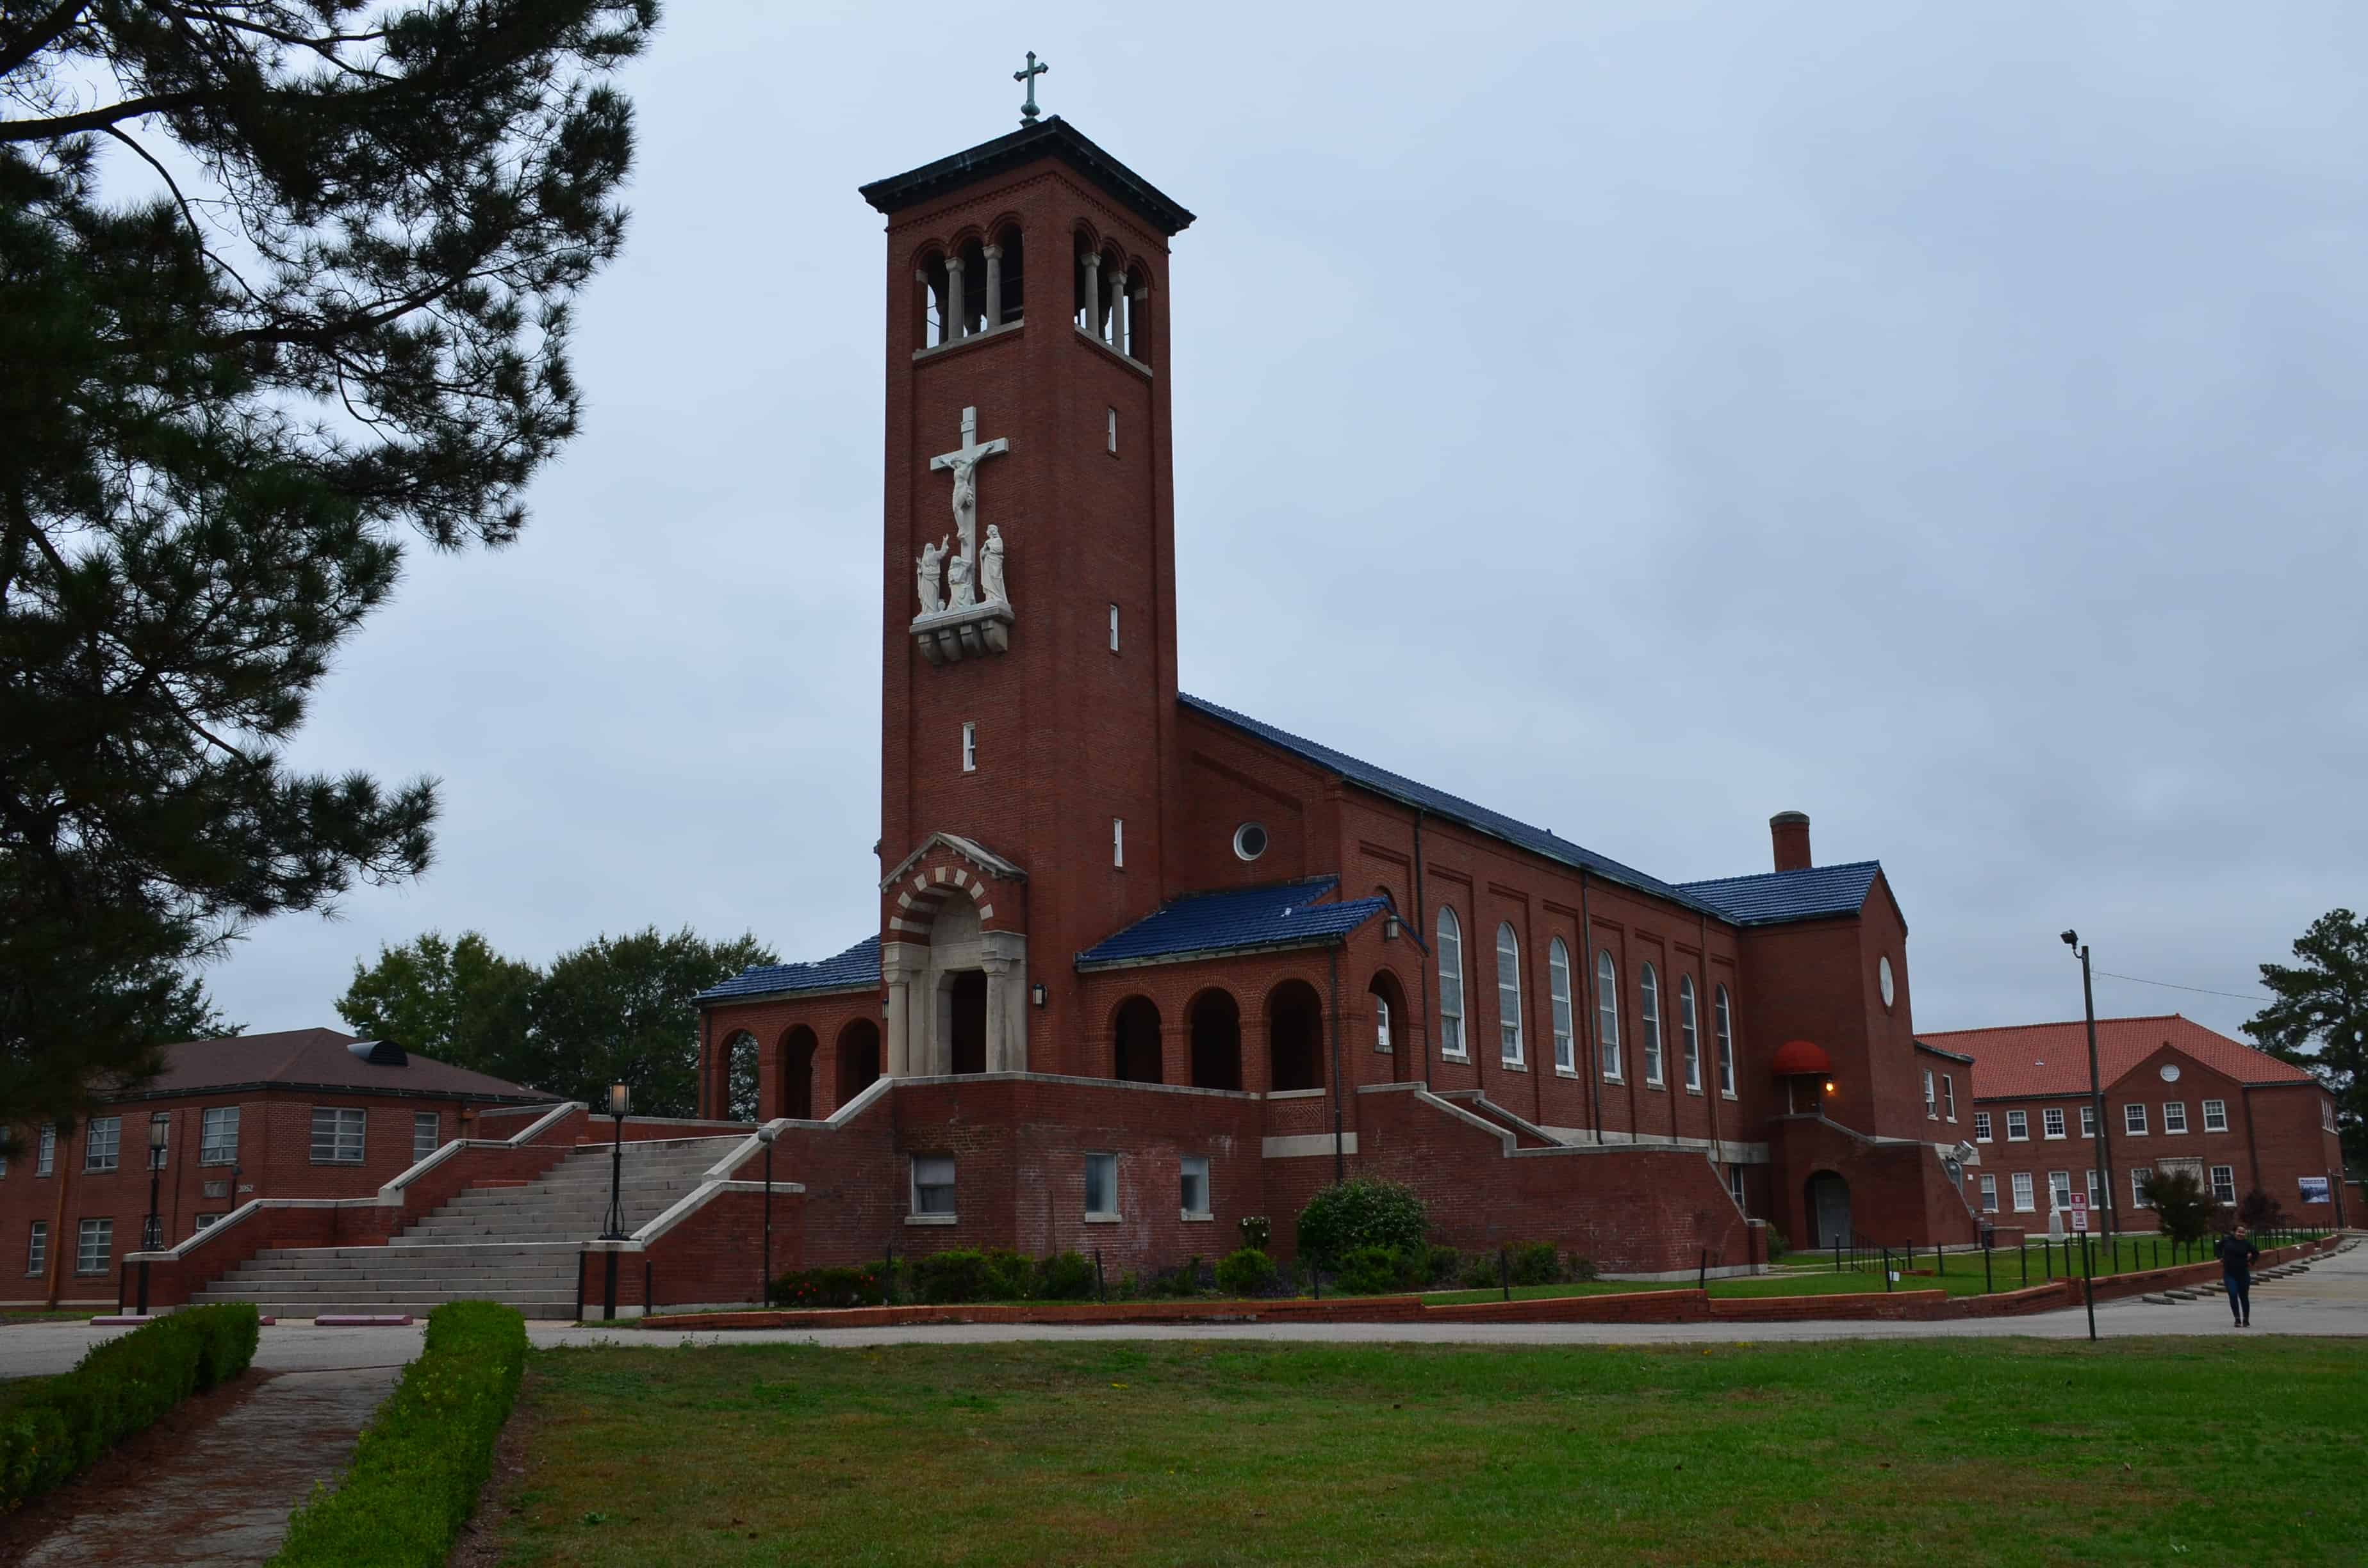 St. Jude Catholic Church on the Selma to Montgomery National Historic Trail in Alabama